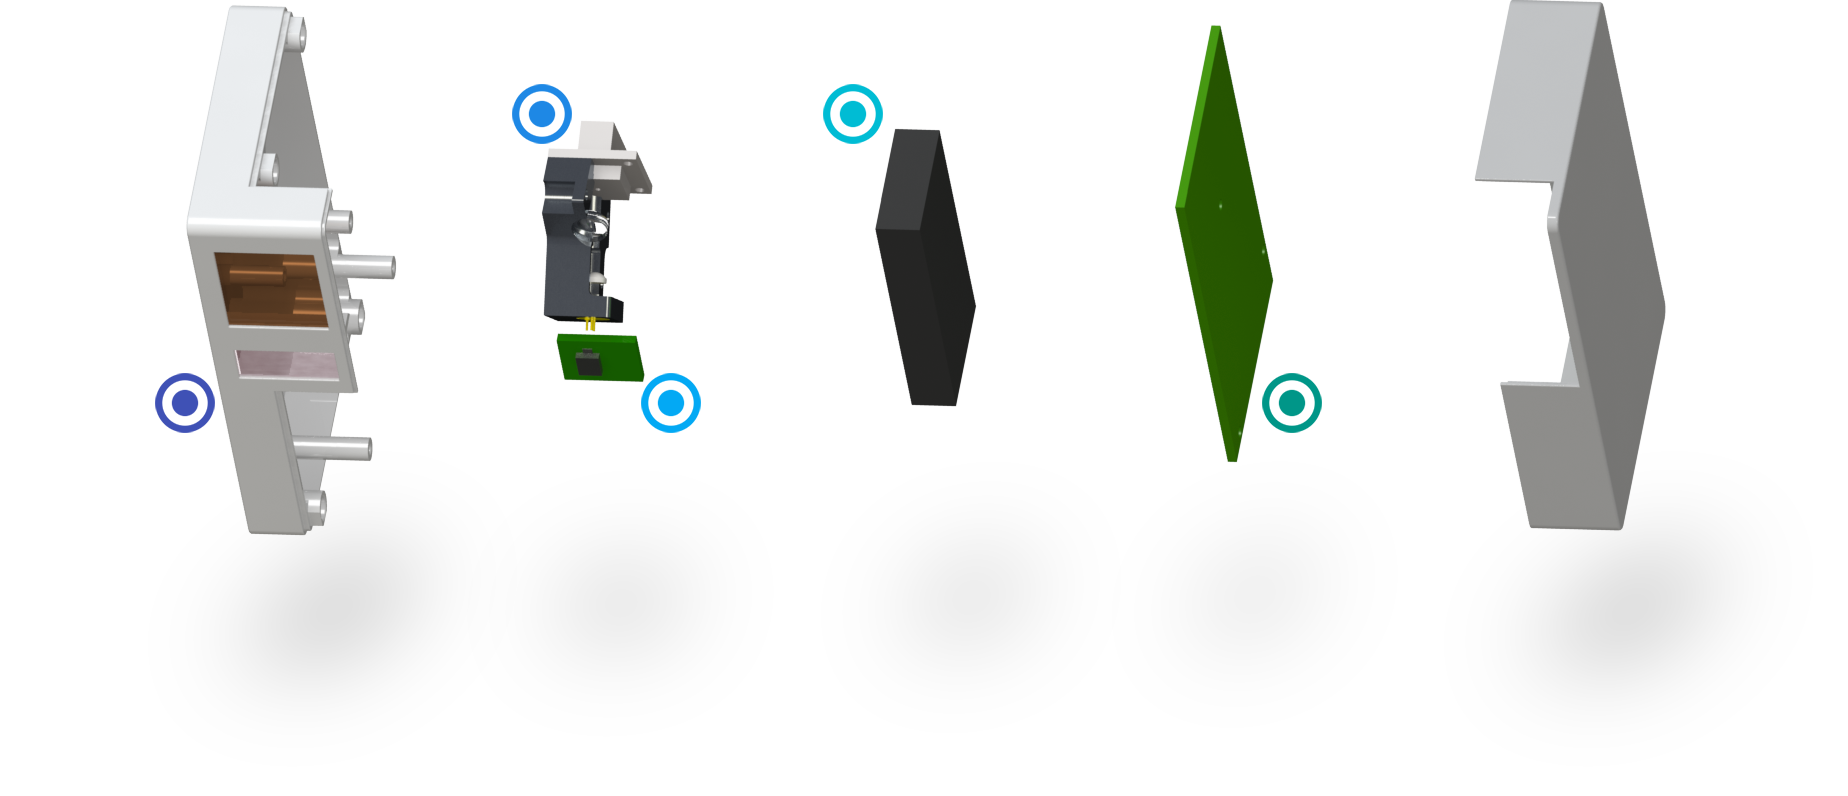 exploded view of Playzer device